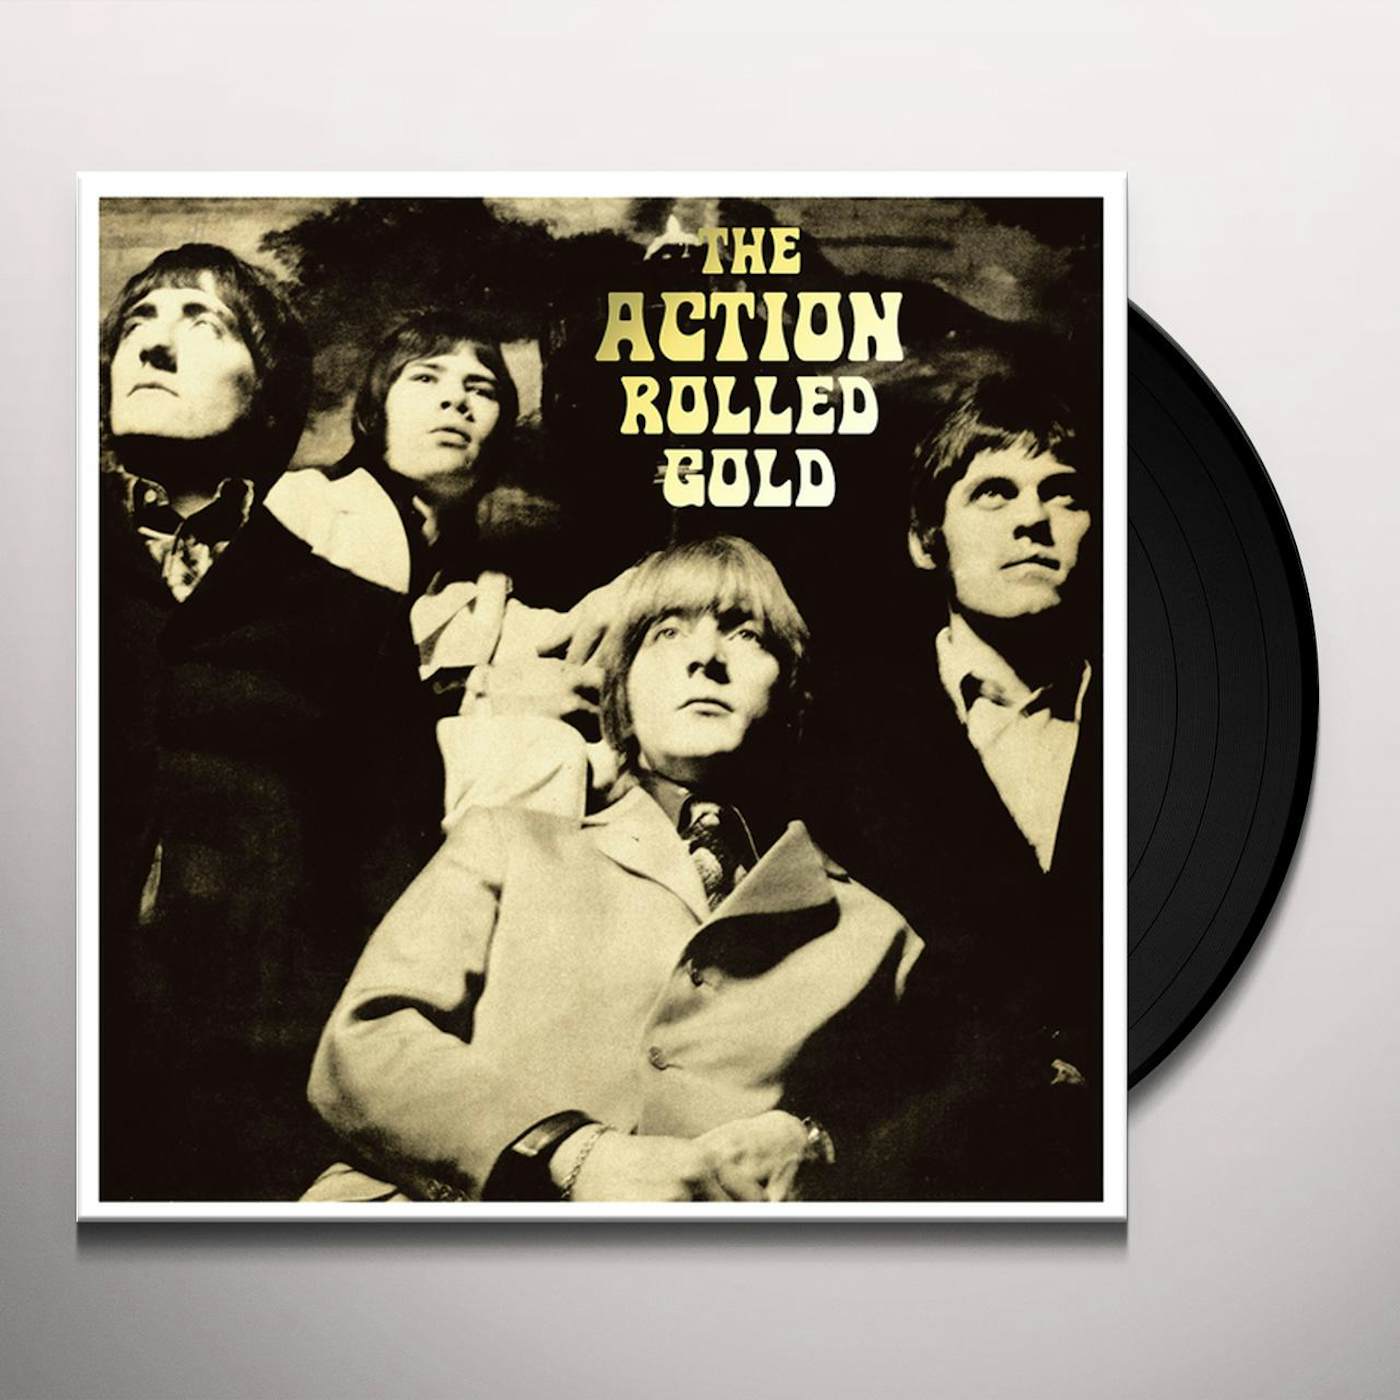 Action ROLLED GOLD Vinyl Record